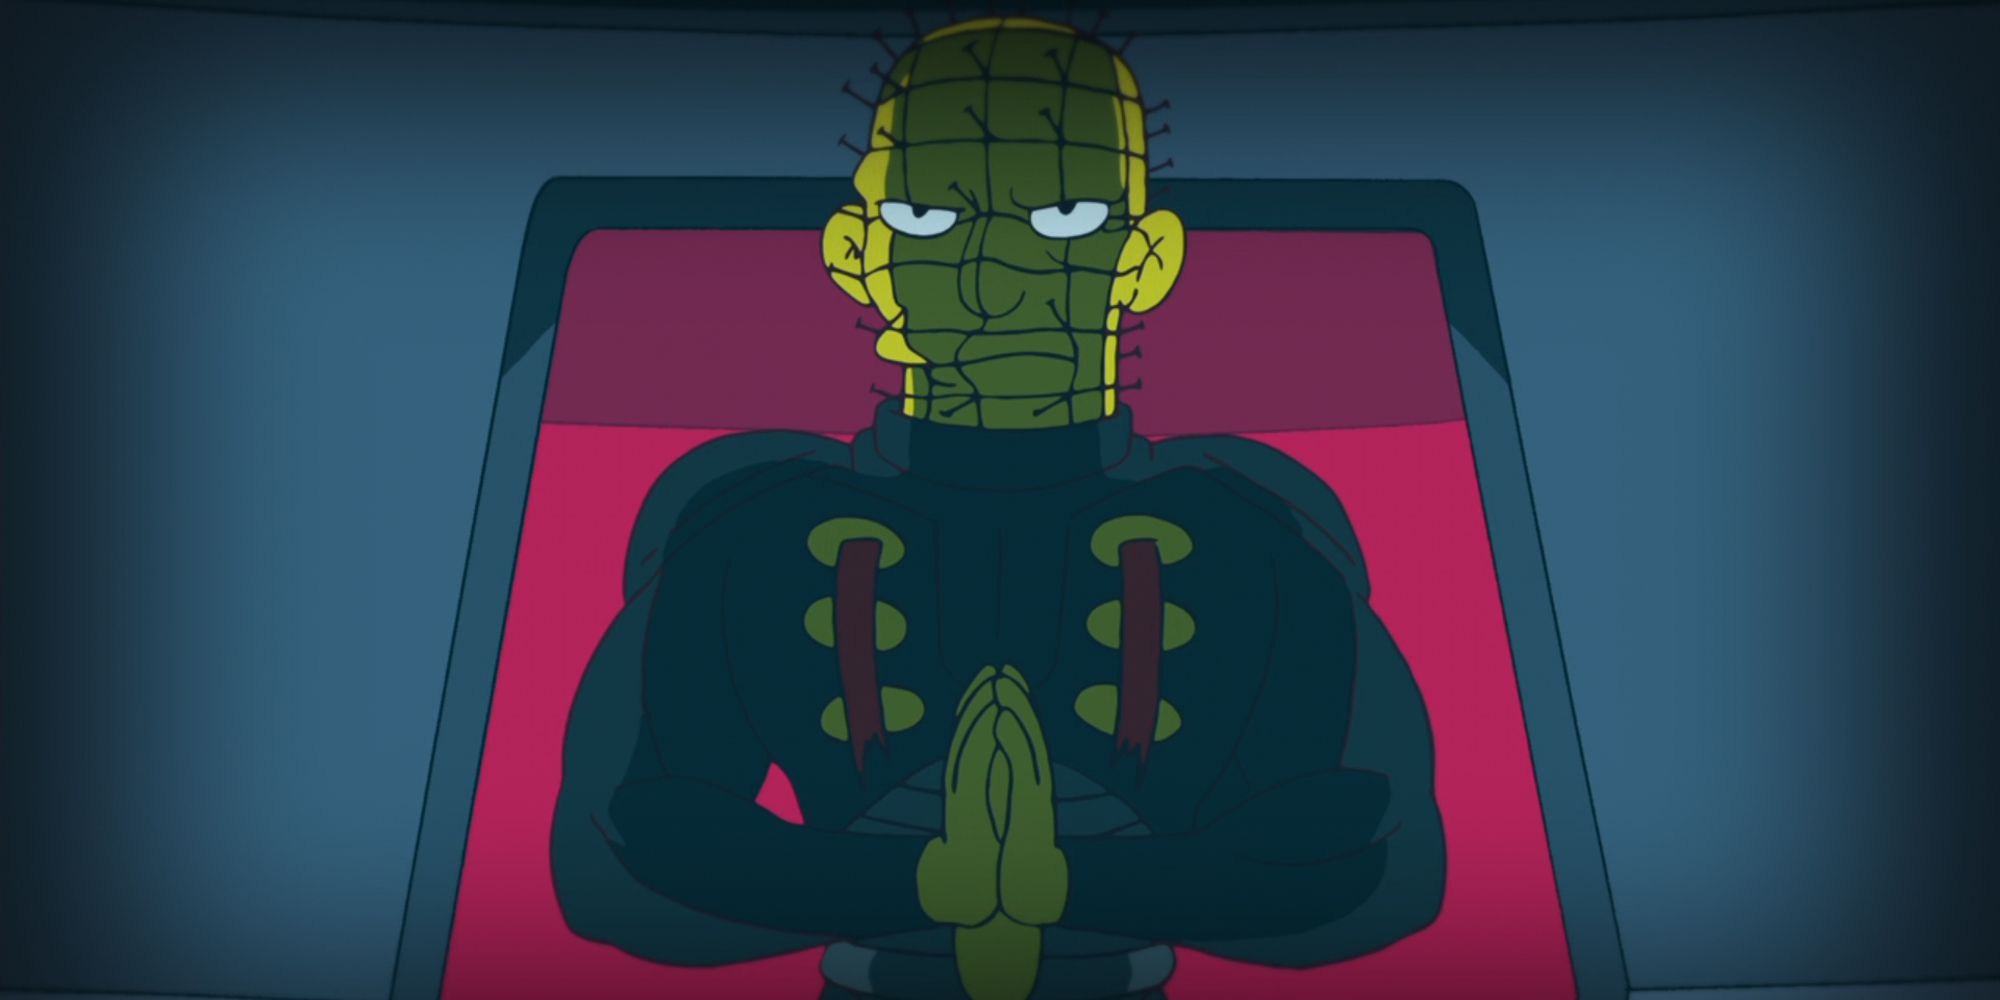 Pinhead appearing to fight Wayne in The Simpsons